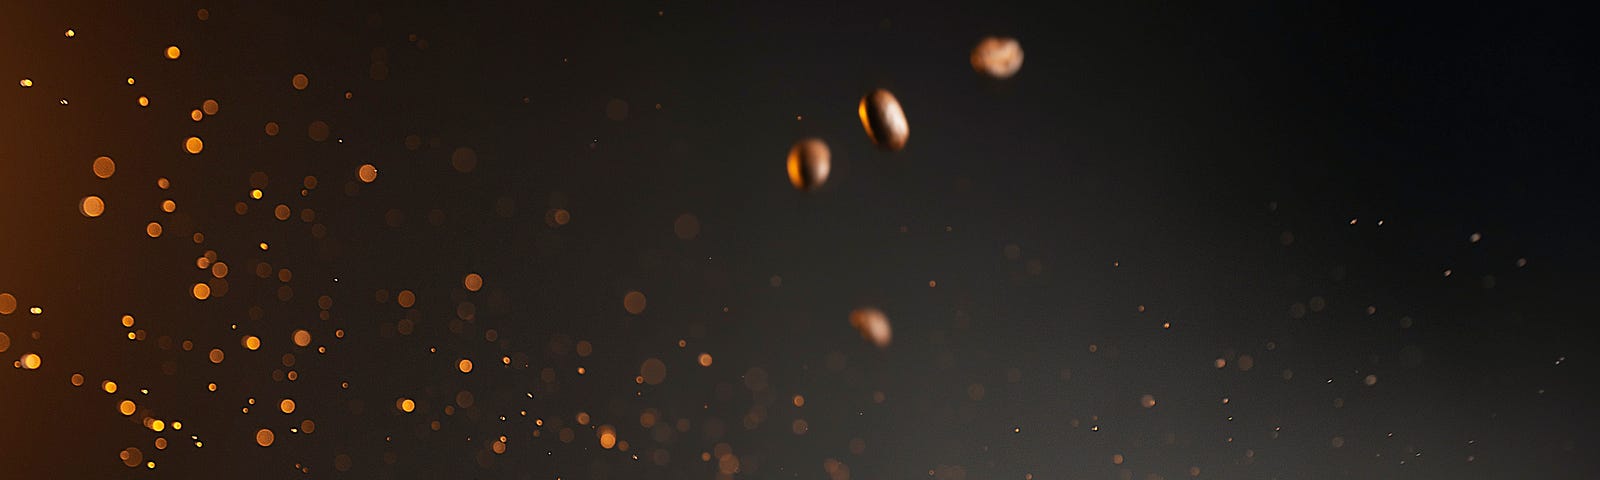 A color photo of coffee beans raining from above, splashing into a white mug of coffee. Caffeine and coffee prepare the brain to move from resting to working on tasks.